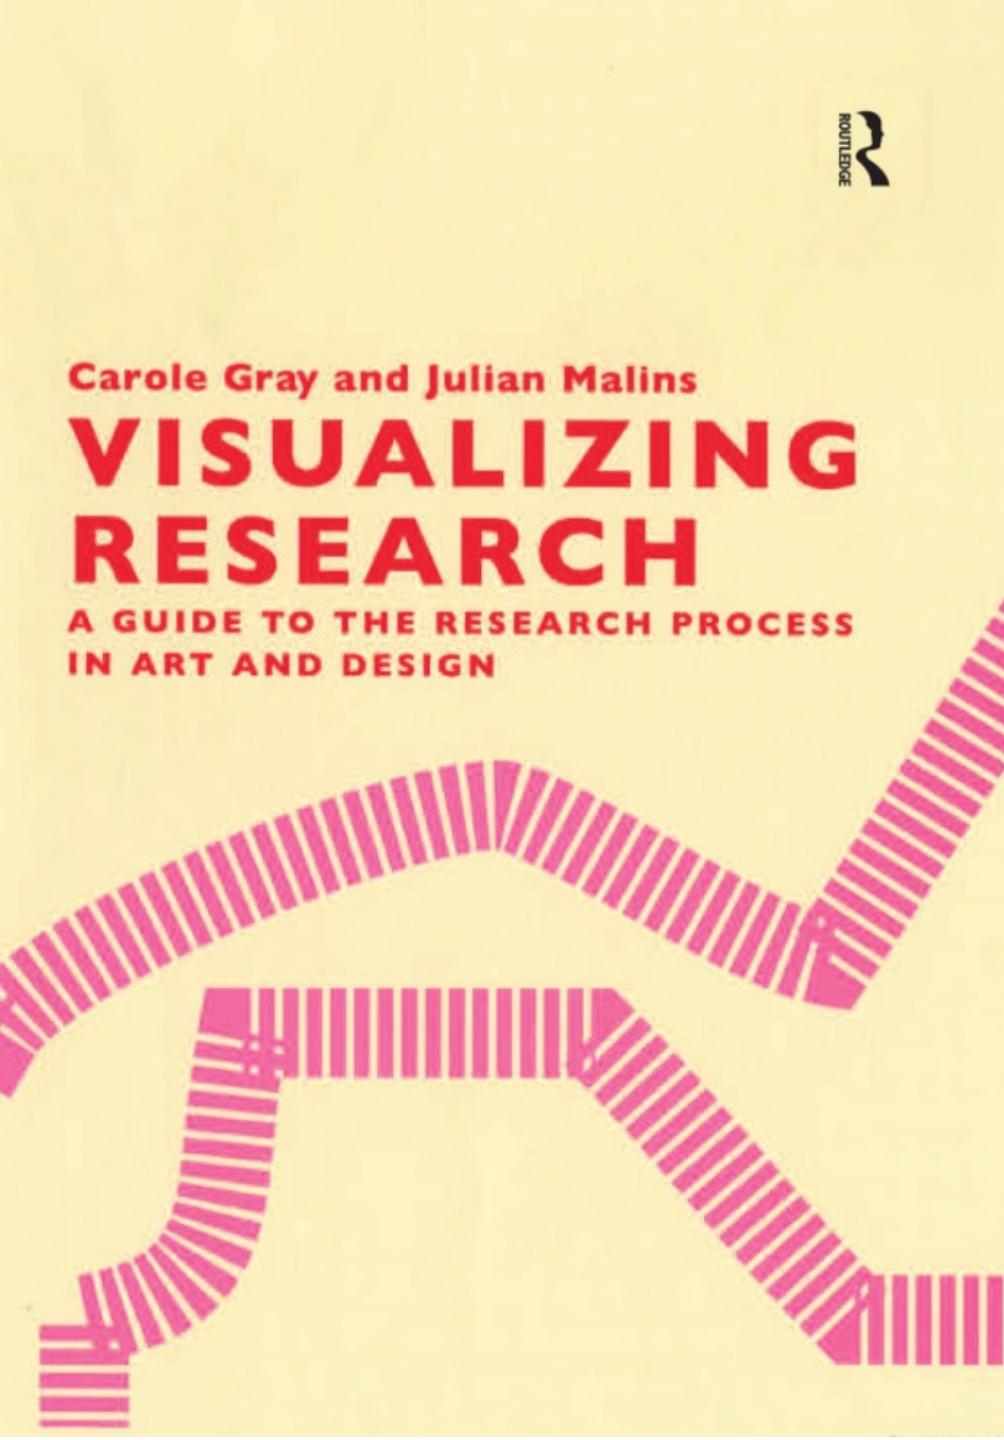 Visualizing Research _ a Guide to the Research Process in Art and Design 1st Edition  by Gray, Carole.; Malins, Julian